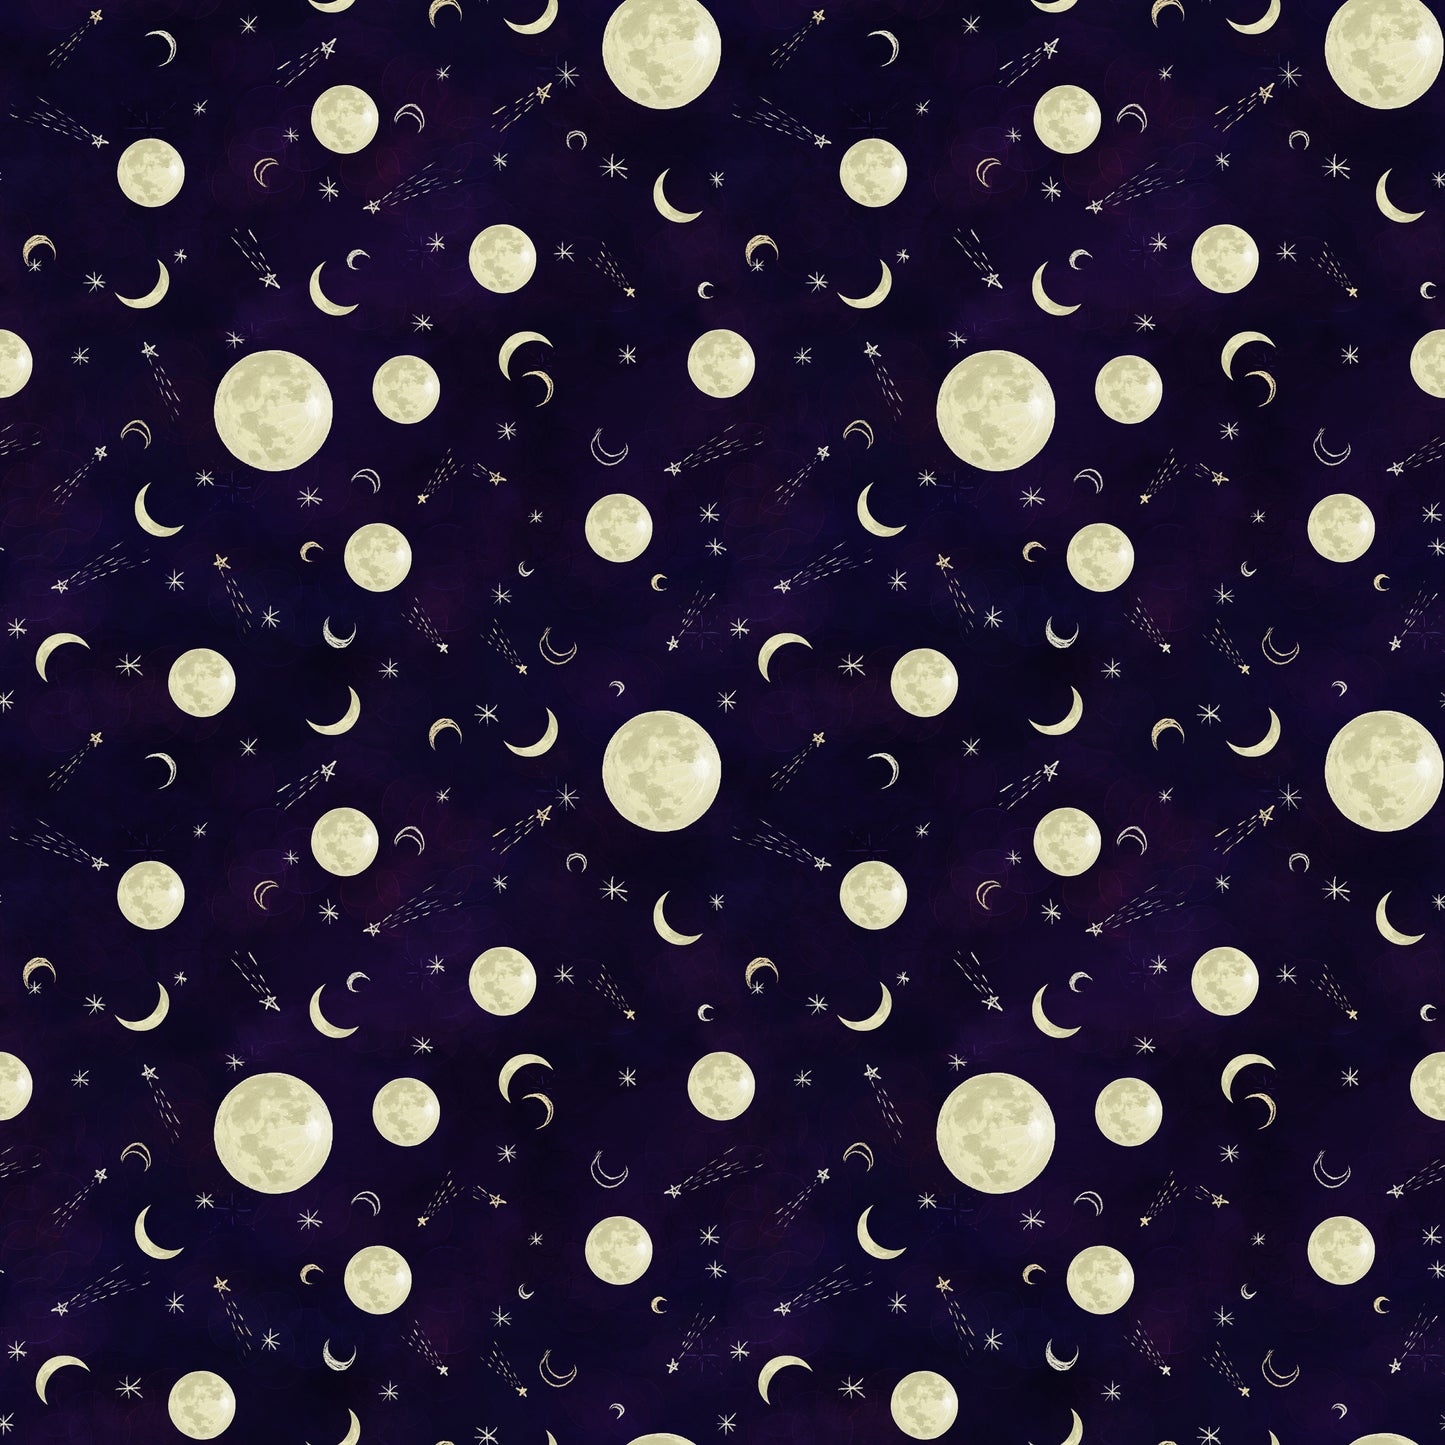 Midnight Rendezvous by Raquel Maciel Full and Crescent Moons Dark Purple    2902-59 Cotton Woven Fabric